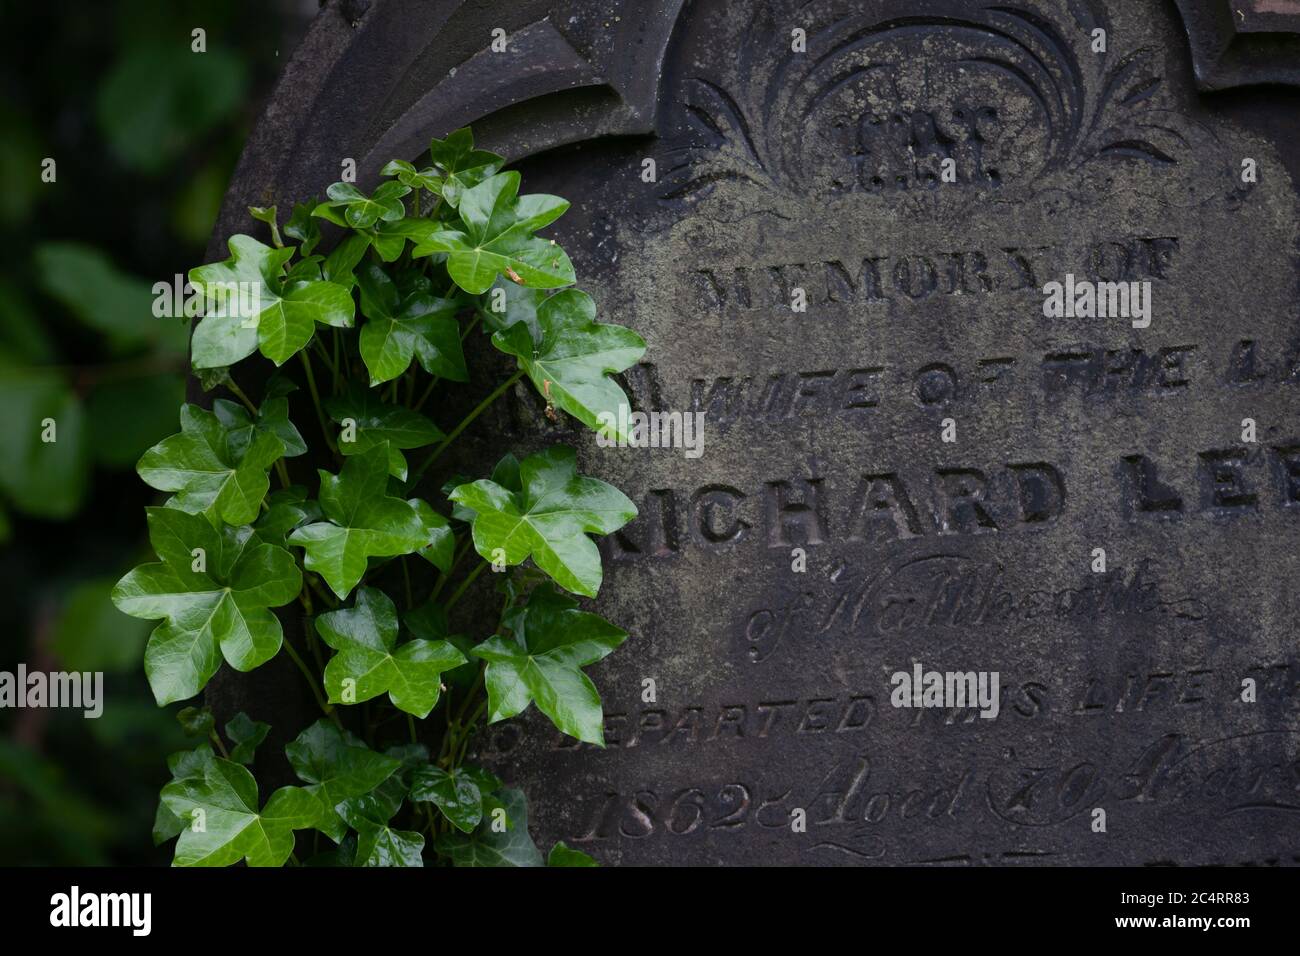 Ivy growing on old headstone. West Midlands. British Isles. Stock Photo